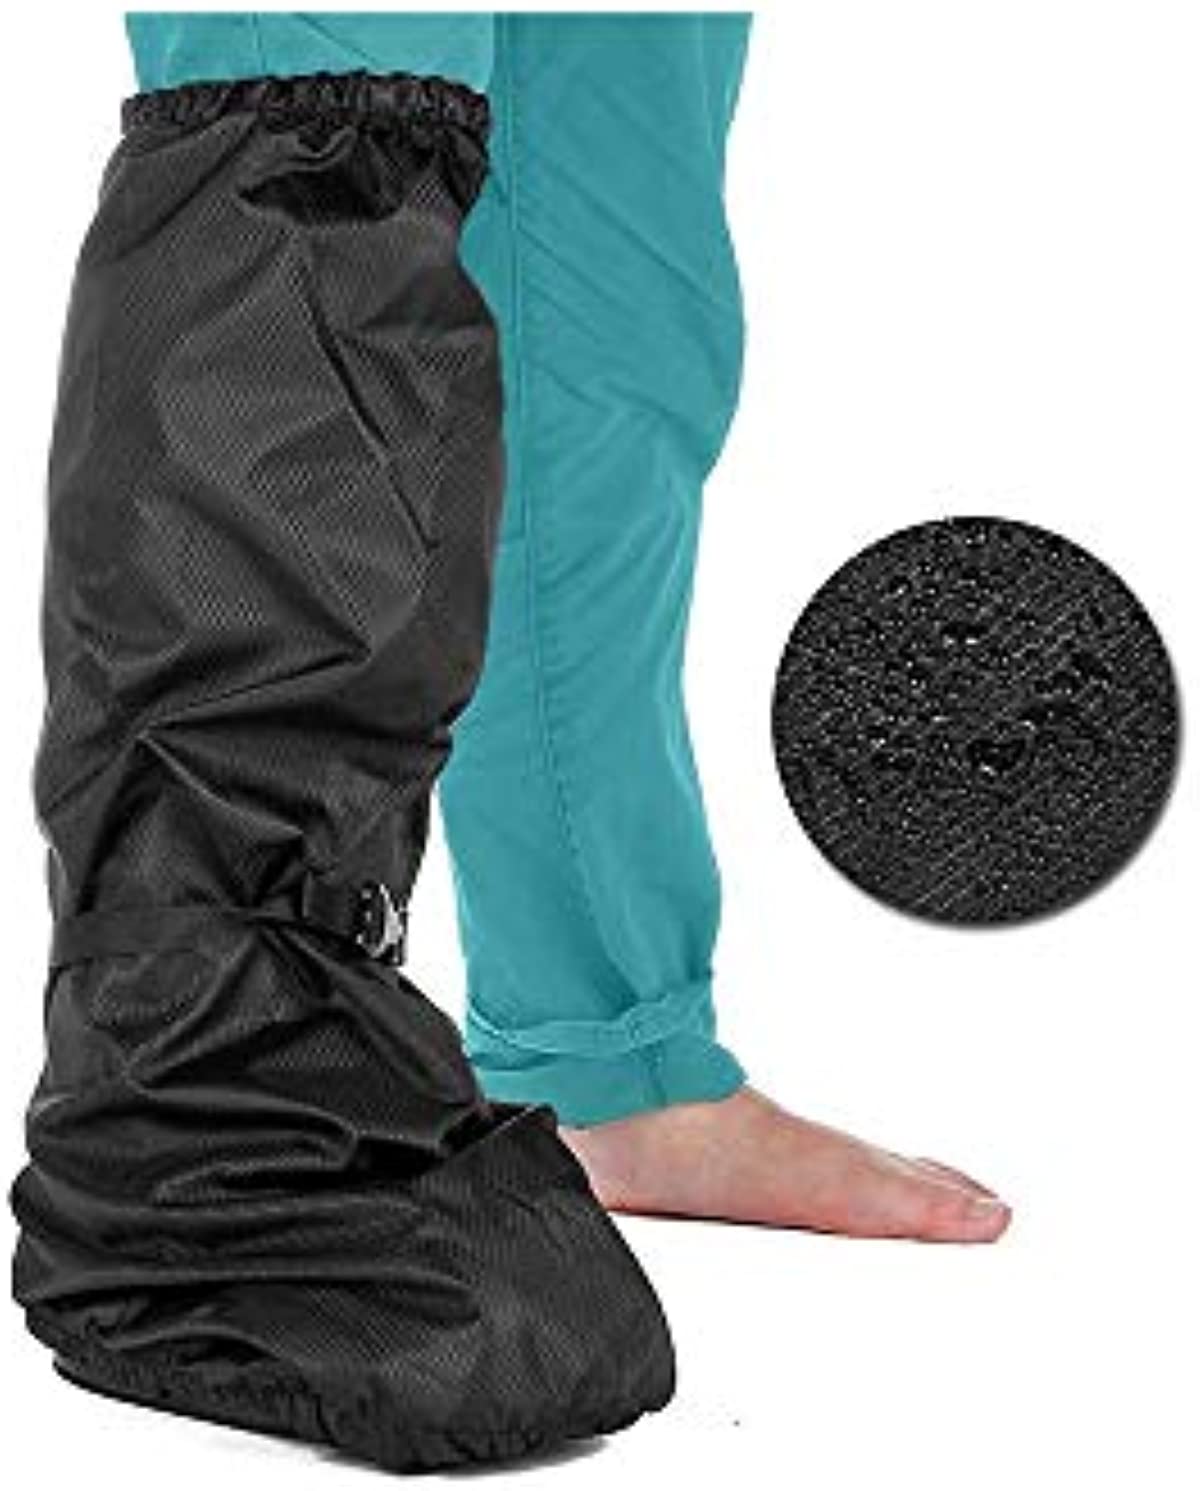 Walking Boot Cover Tall Orthopedic Medical Boot Cover Waterproof Fracture Foot Cast Cover for Men Women Outdoor Winter Snow Rain Protector Recovery Boot Cover (Black)